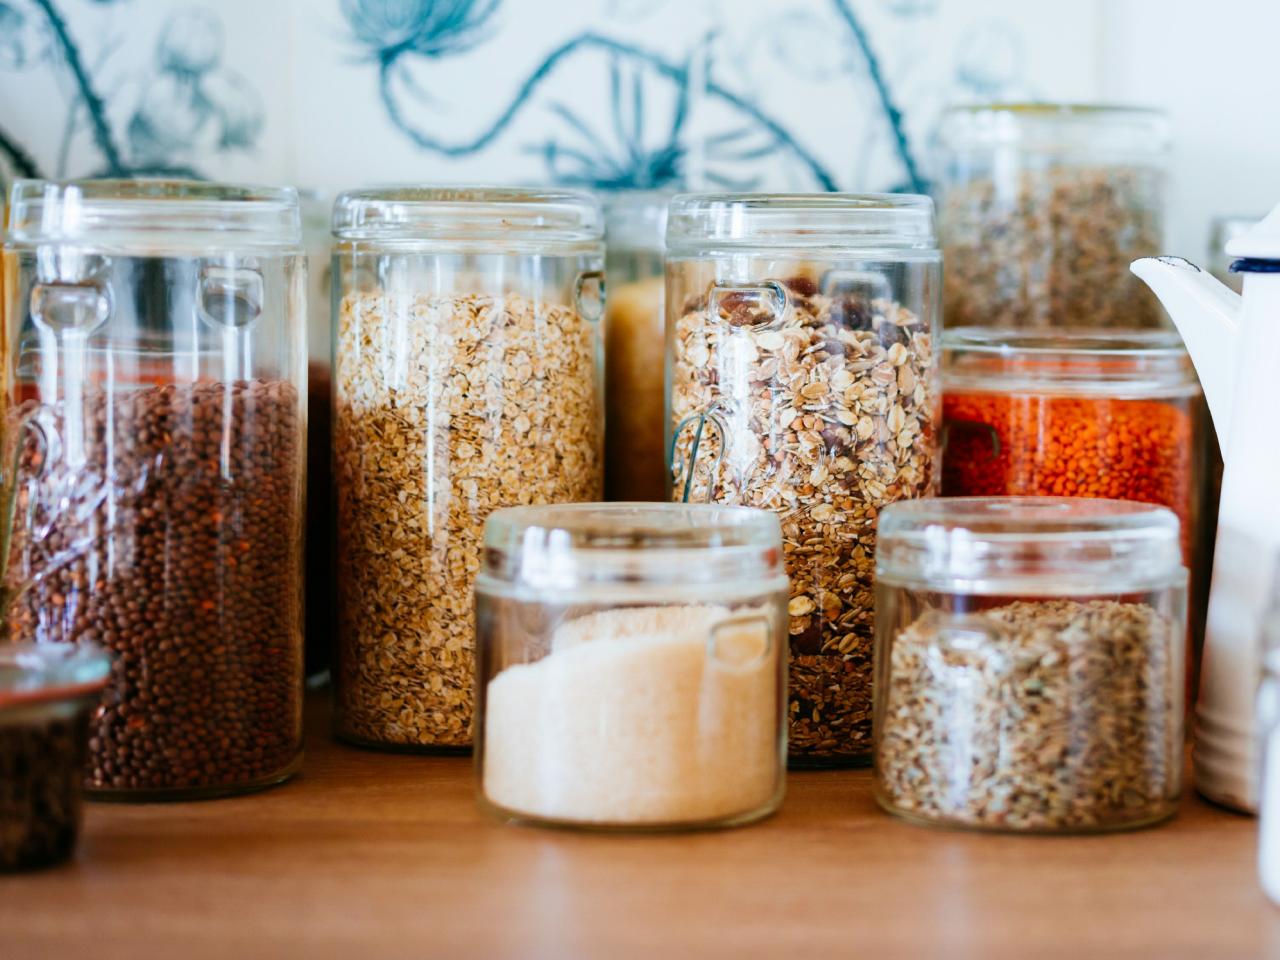 How To Get Rid Of Pantry Bugs Food Network Fixes For Kitchen